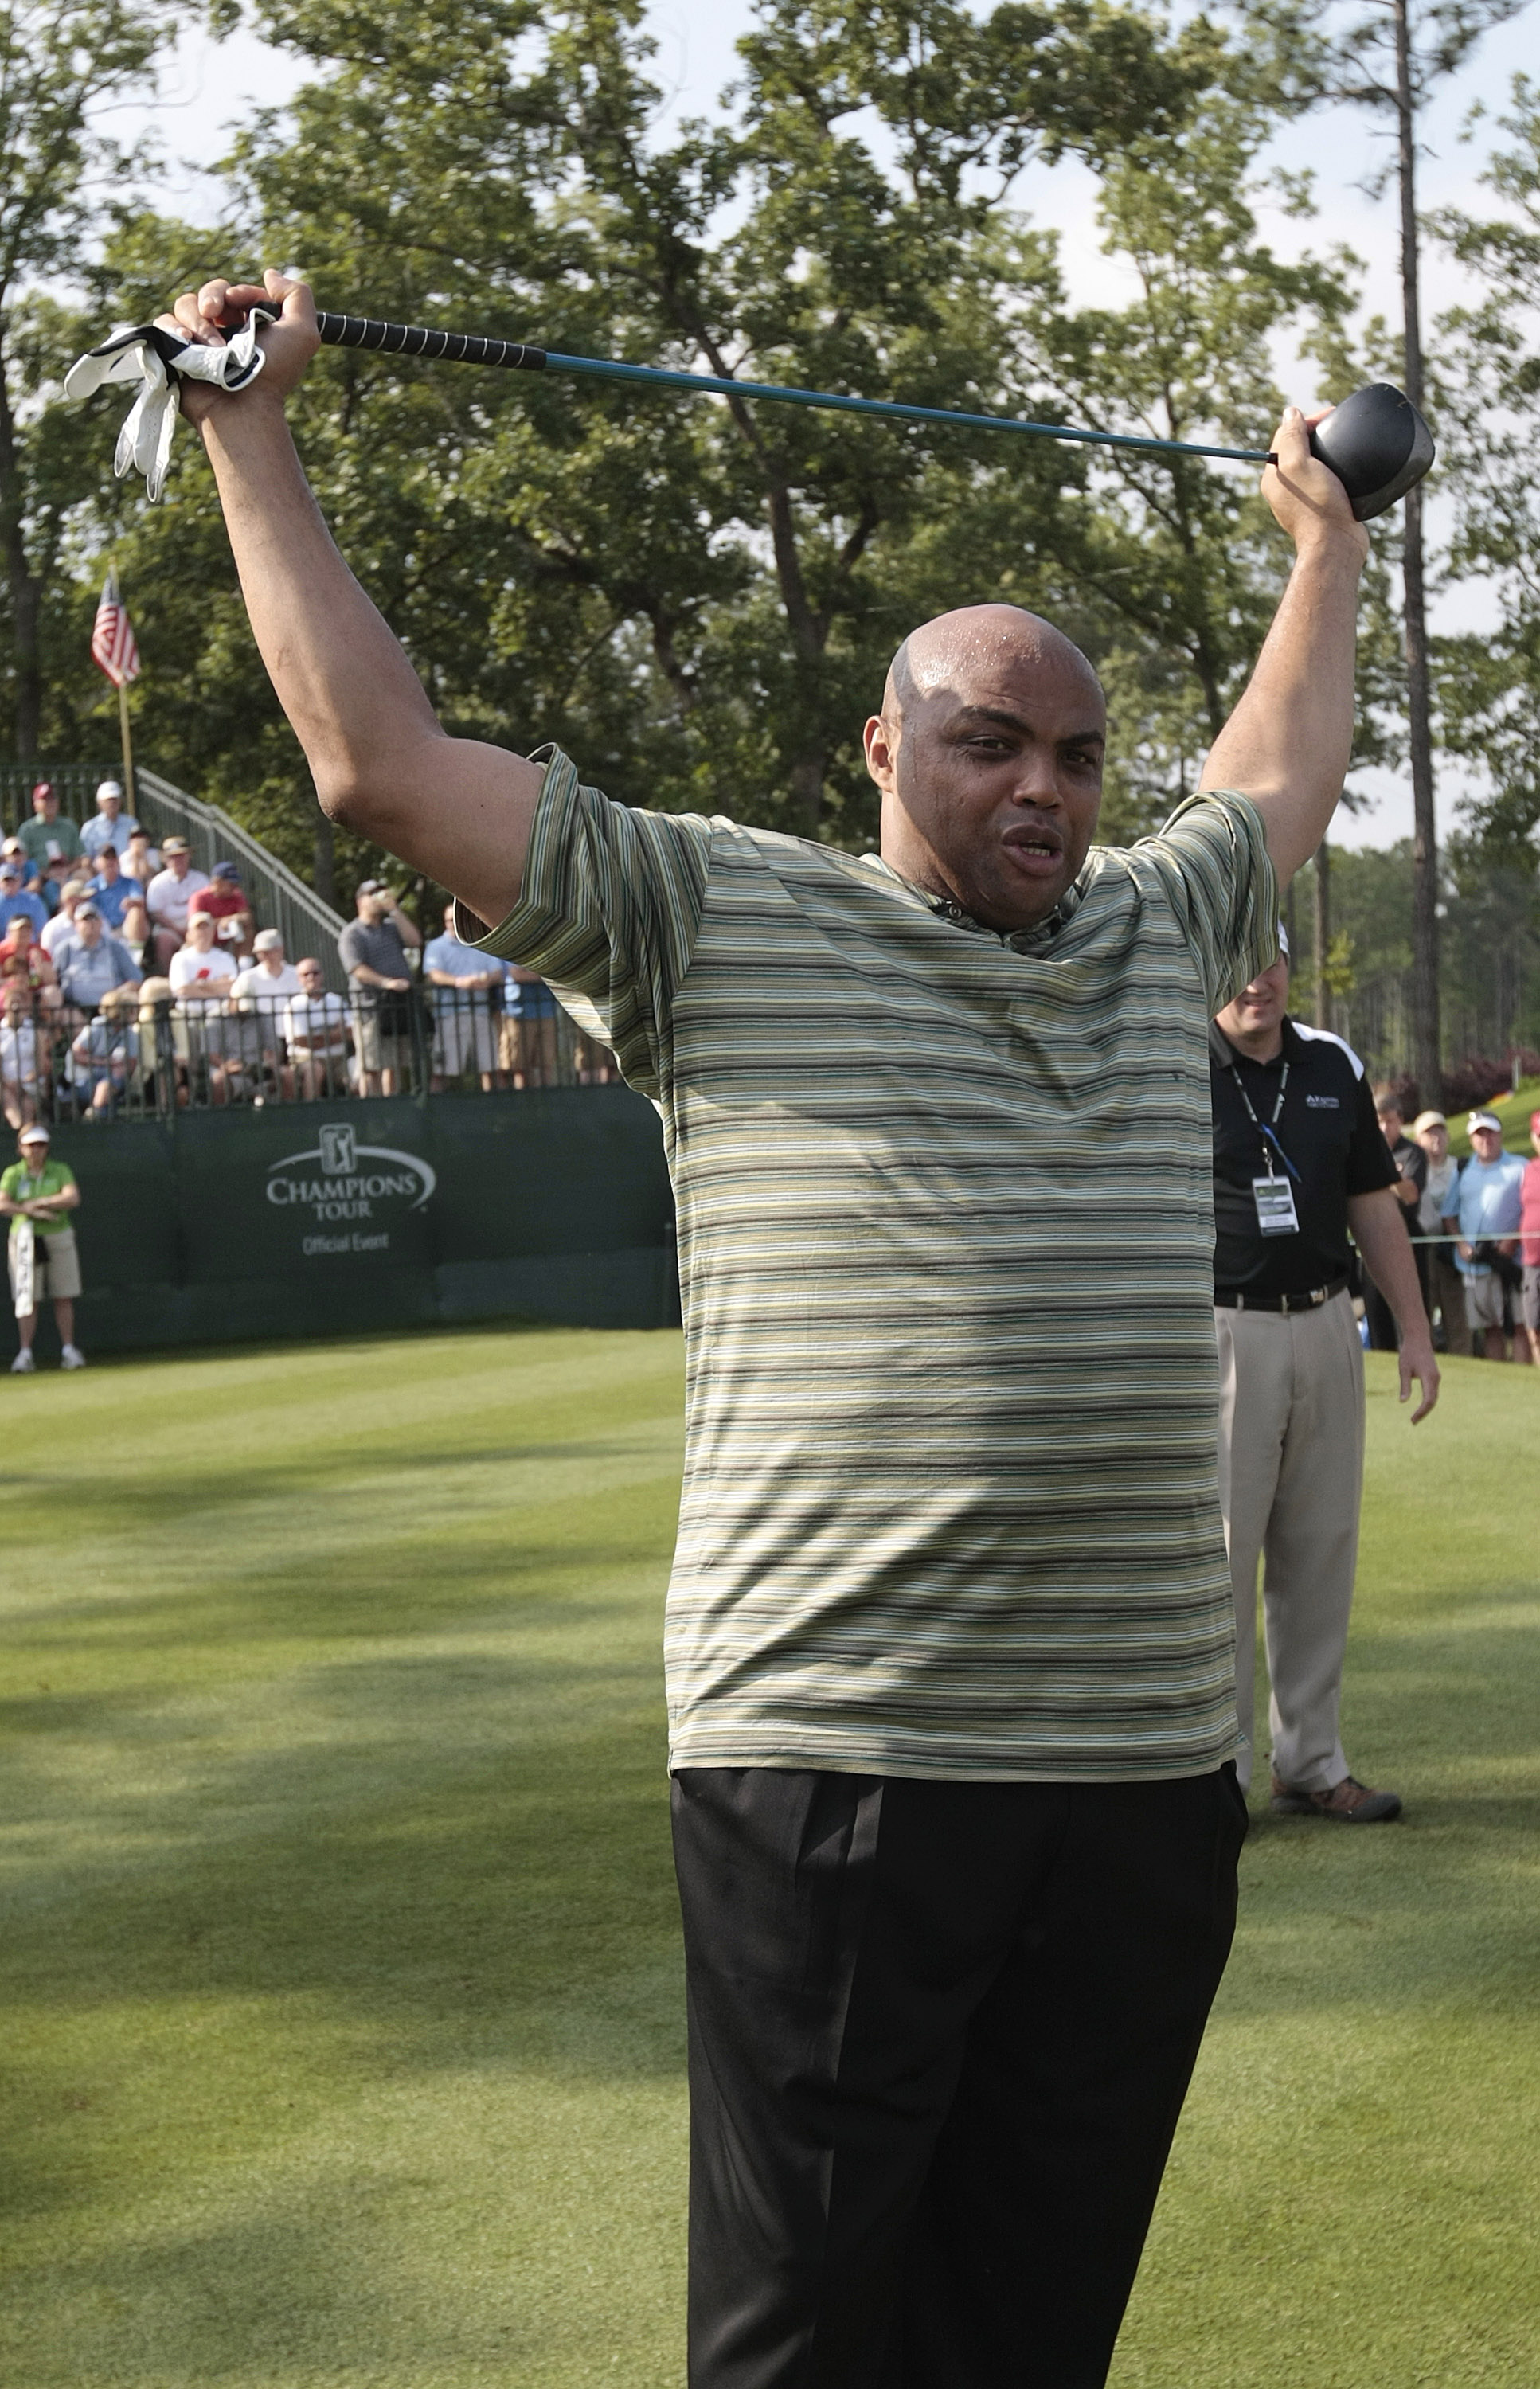 BIRMINGHAM, AL - MAY 14:  Former basketball star Charles Barkley prepares to tee off on the first hole during the Thursday Pro-AM of the Regions Charity Classic at the Robert Trent Jones Golf Trail at Ross Bridge on May 14, 2009  in Birmingham, Alabama.  